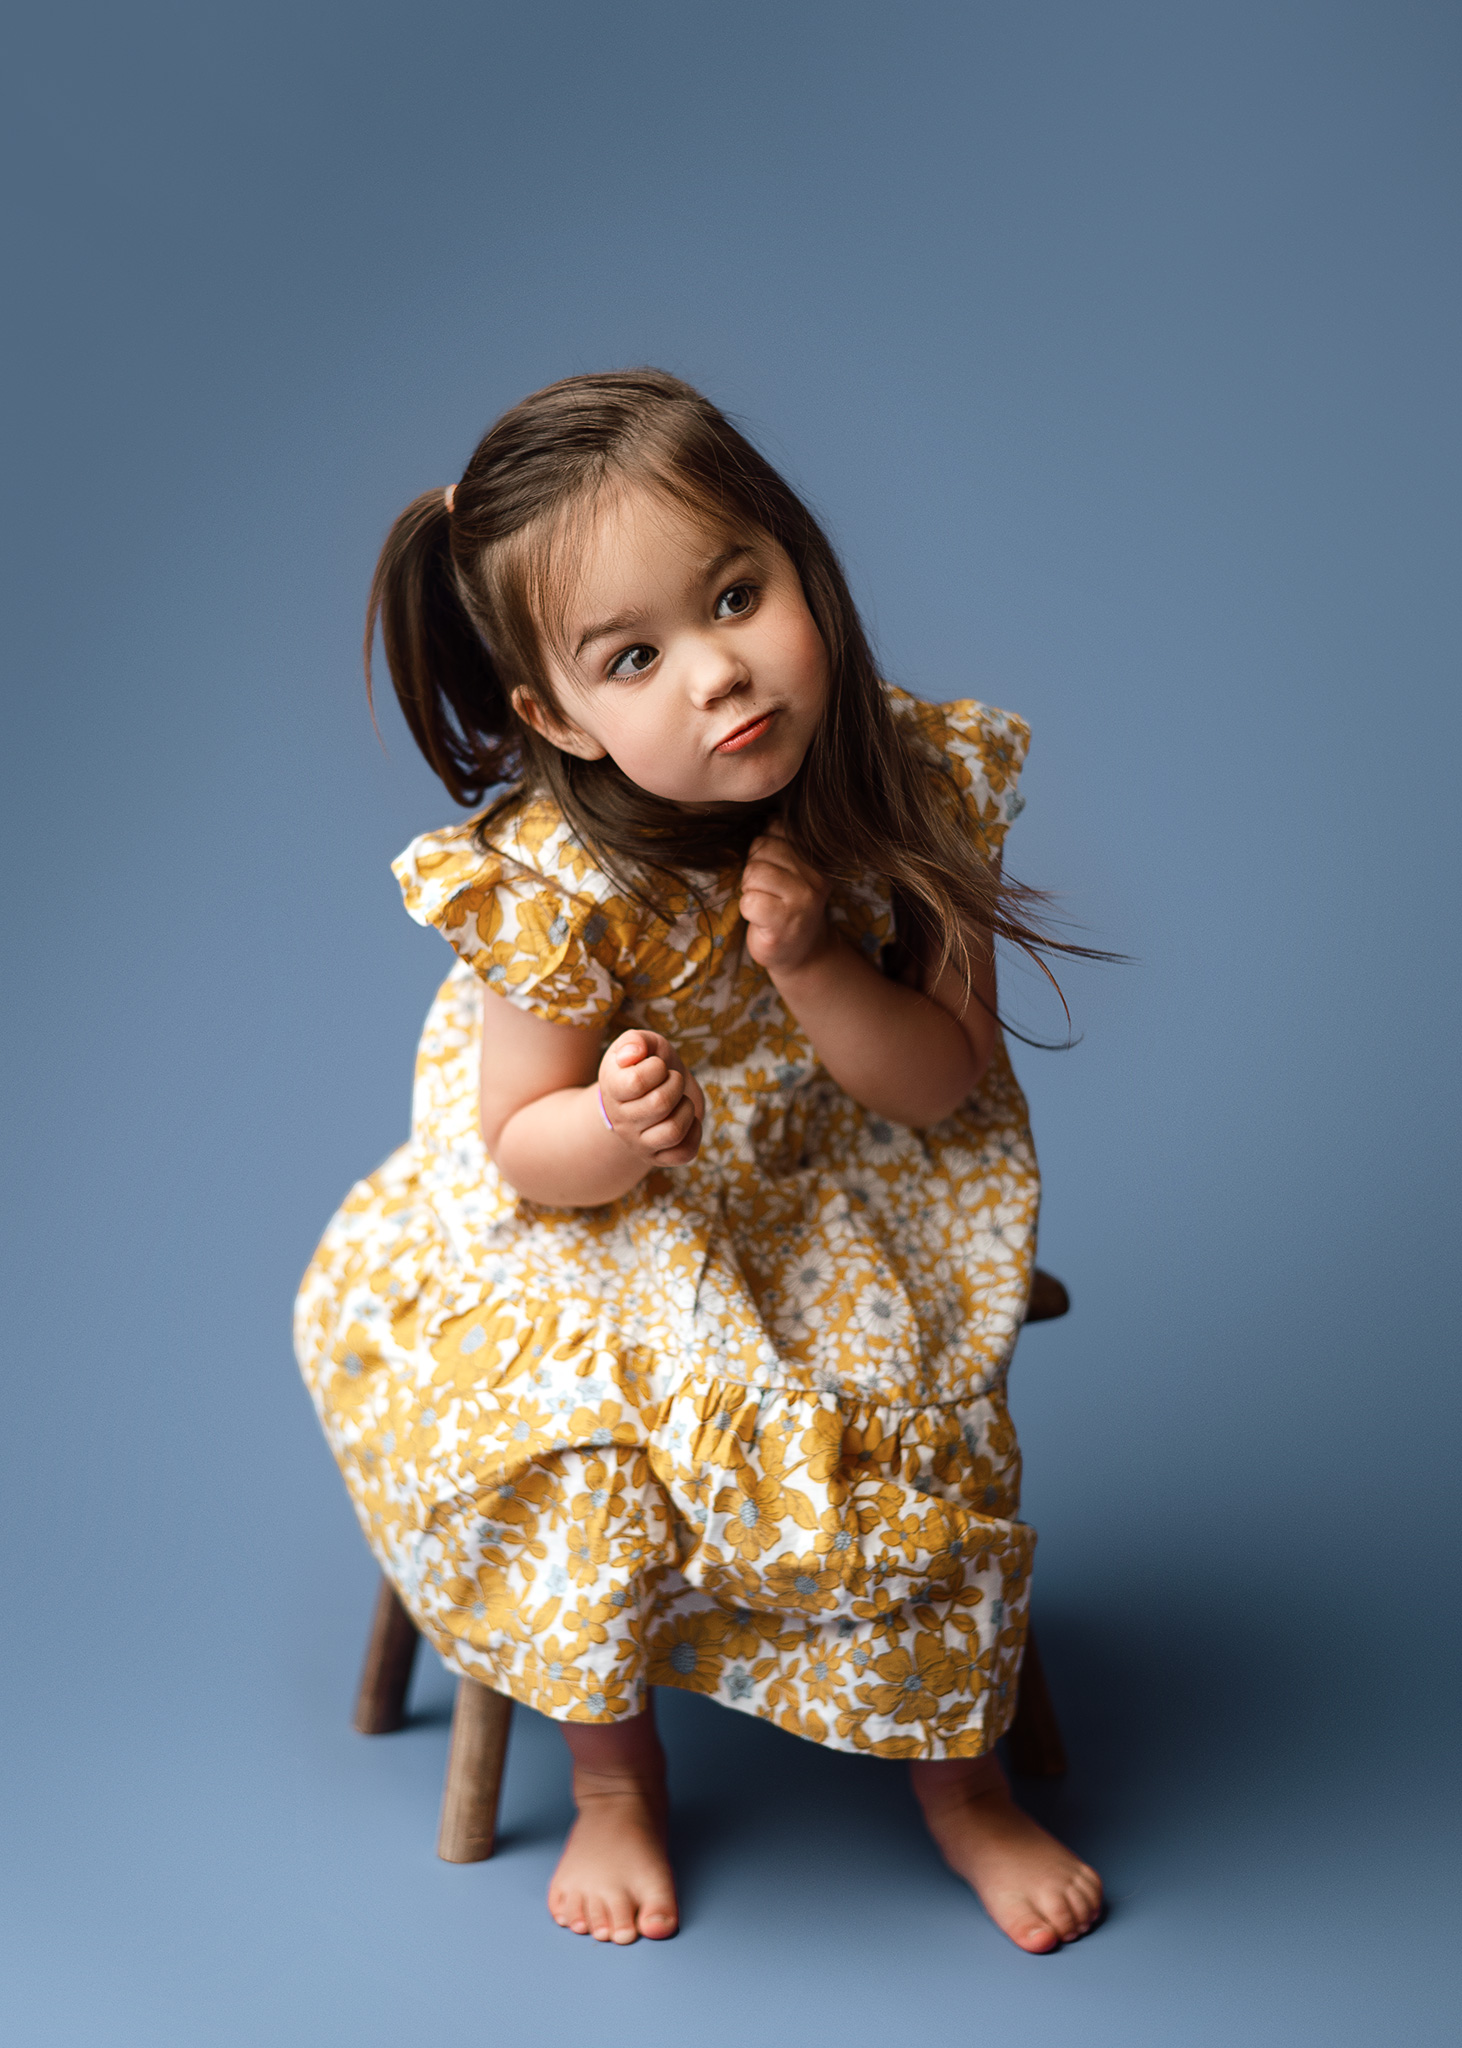 child photography nebraska, 3 year old portrait session, newborn nerds seamless paper, yellow and blue photo session, flower dress carters